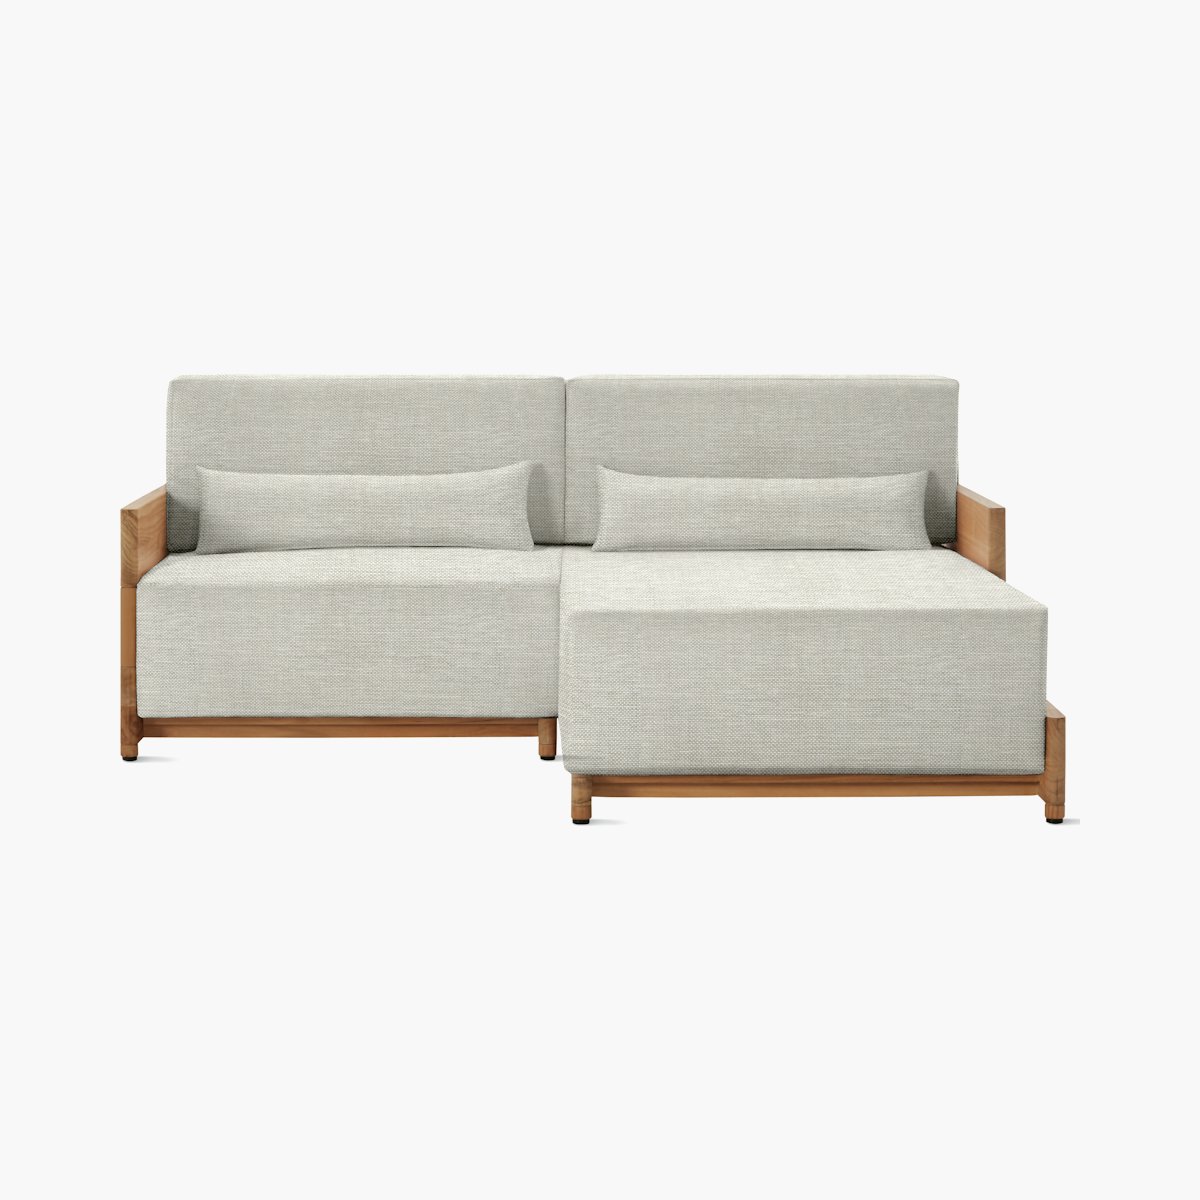 Esplanade 2 Piece Chaise Sectional